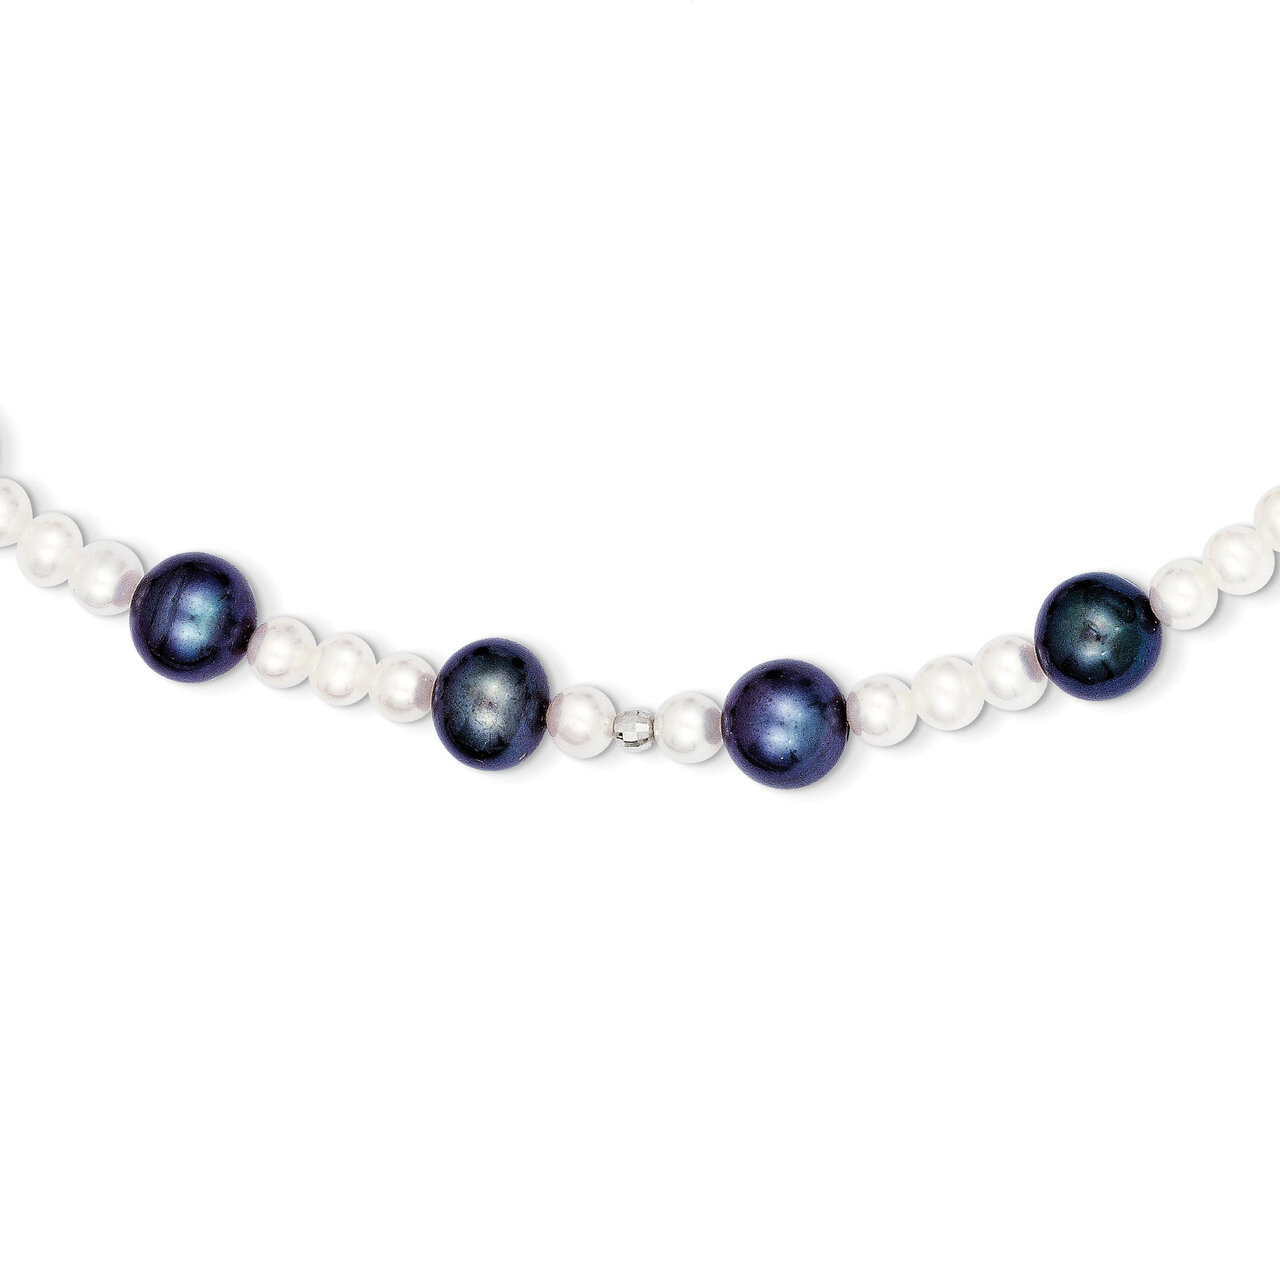 Cultured Peacock Pearl with Mirror Bead Necklace 18 Inch 14k White Gold XF437-18